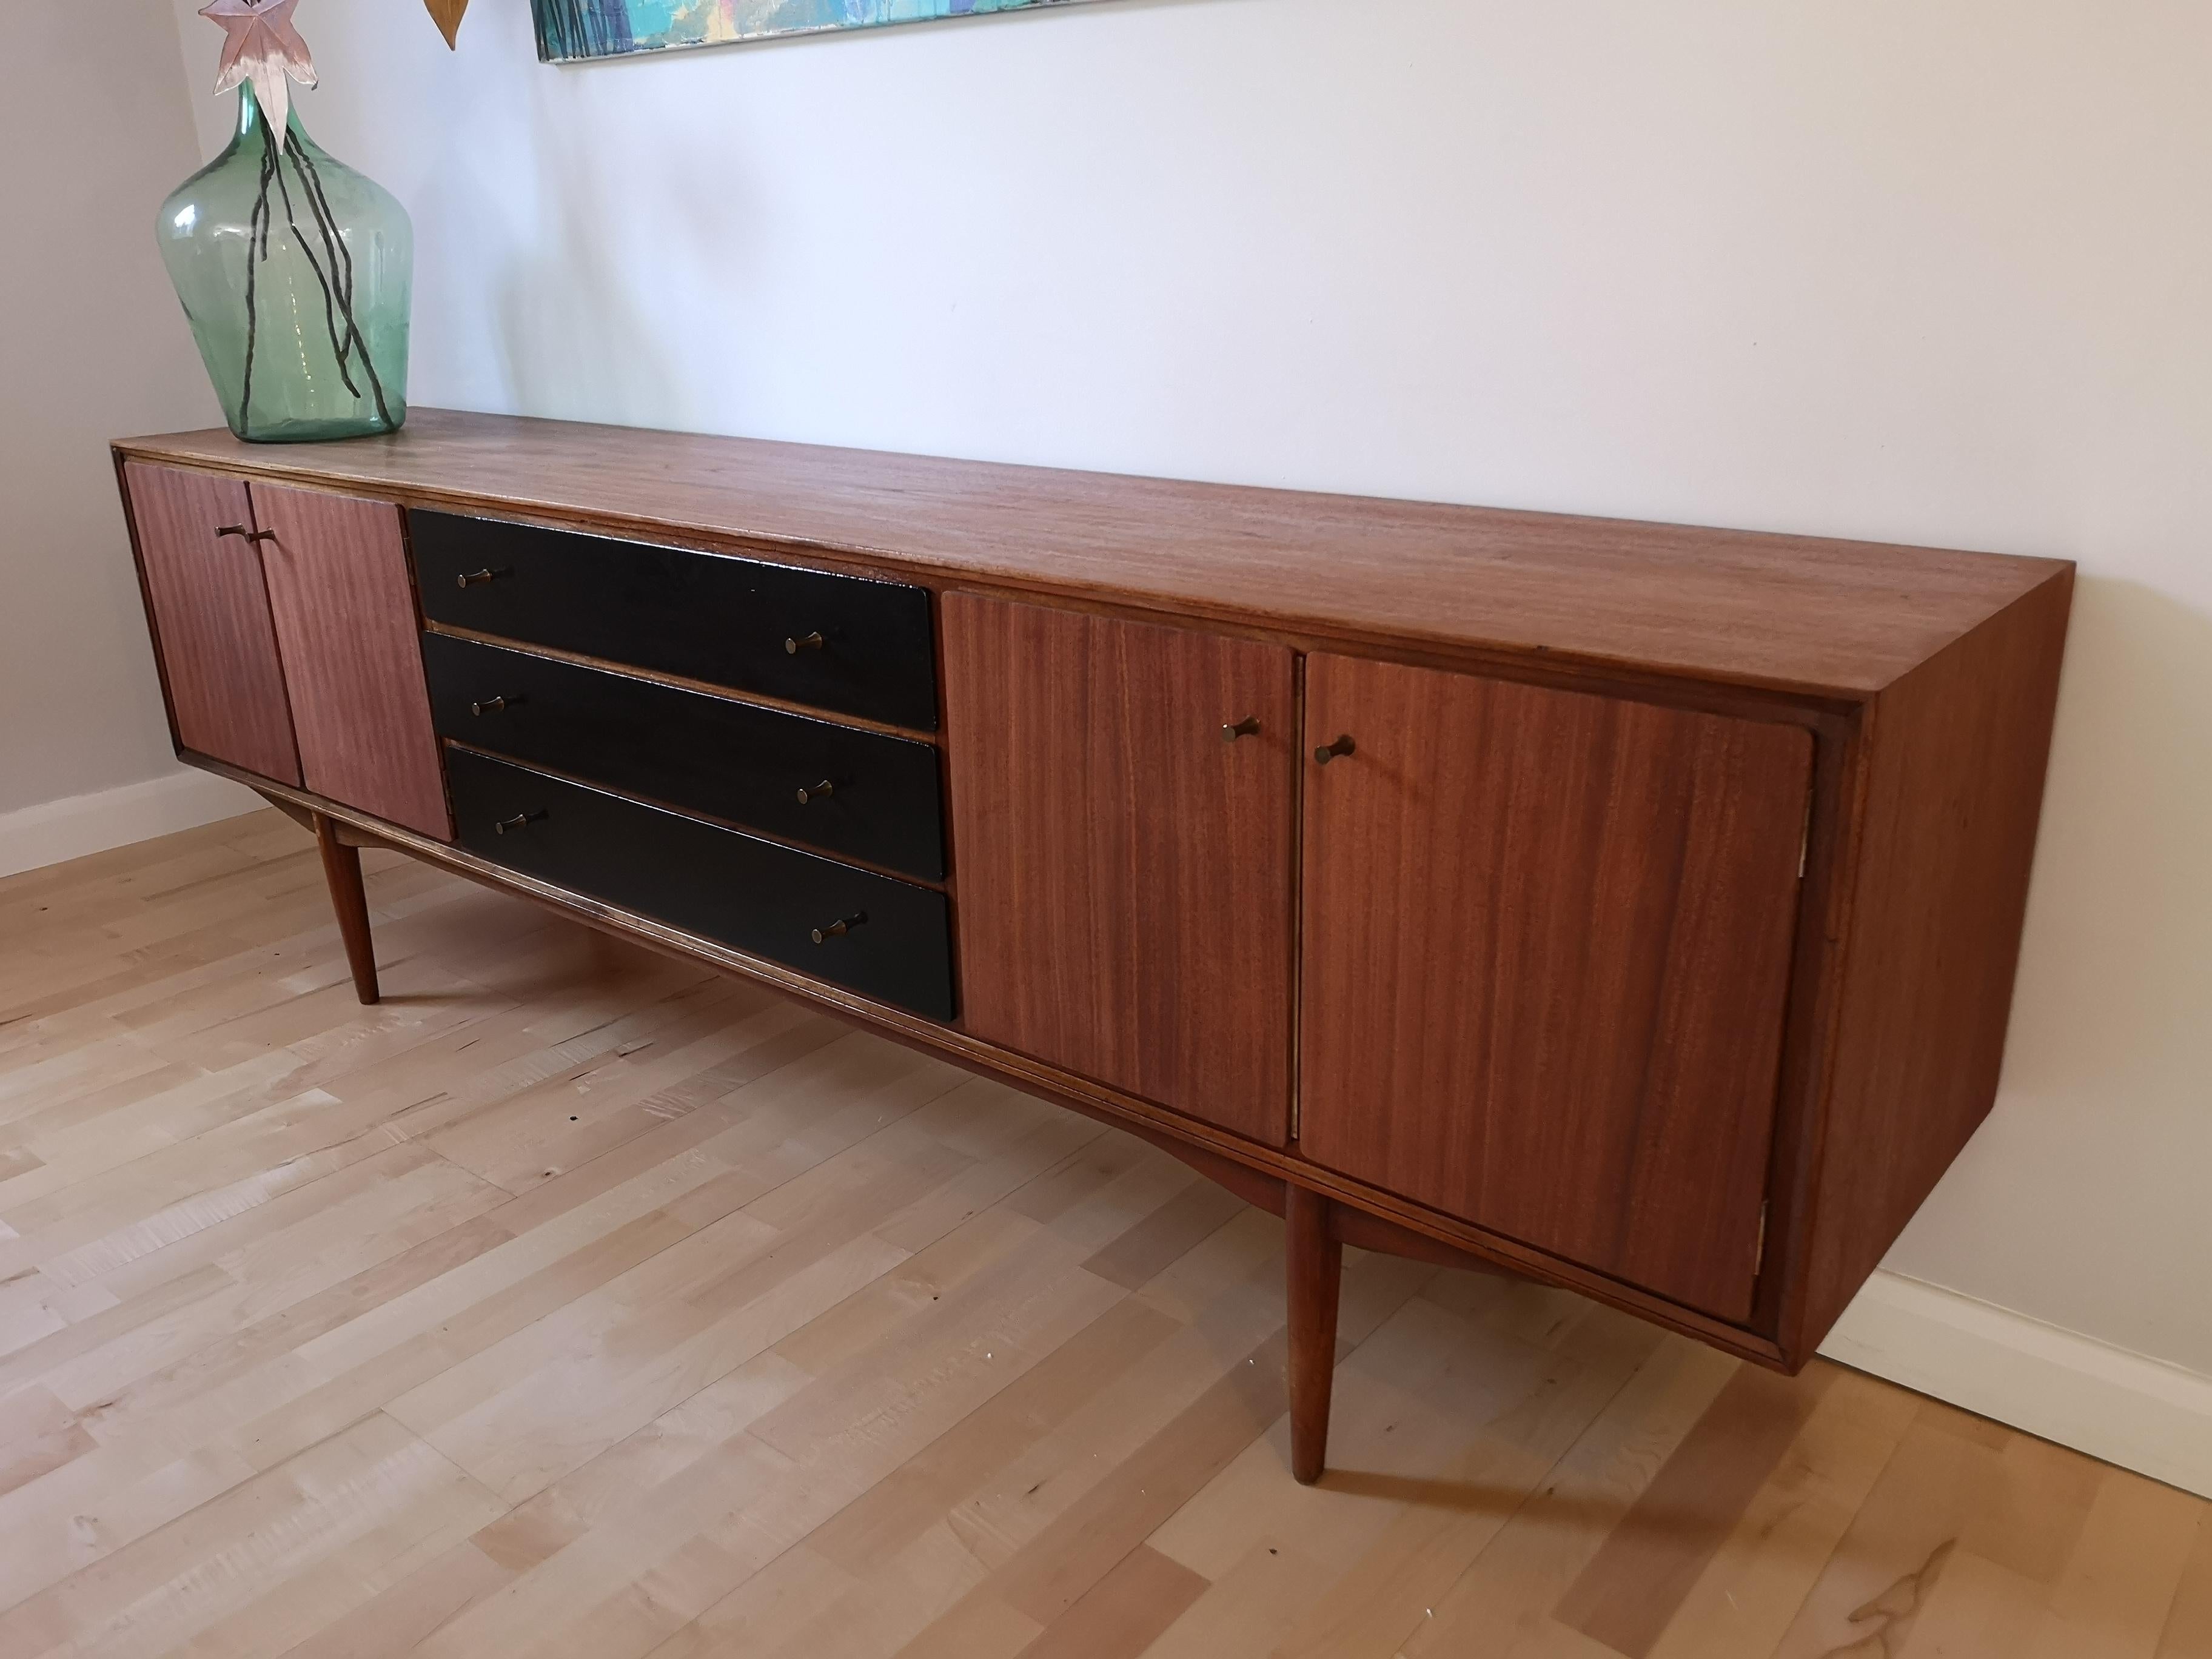 A stunning large 225cm/7ft3 midcentury teak sideboard credenza by Everest of Long Eaton, England. Originally purchased from Heal's in 1959. The doors and drawers were originally painted white. Stripping off the paint revealed lovely teak grain on